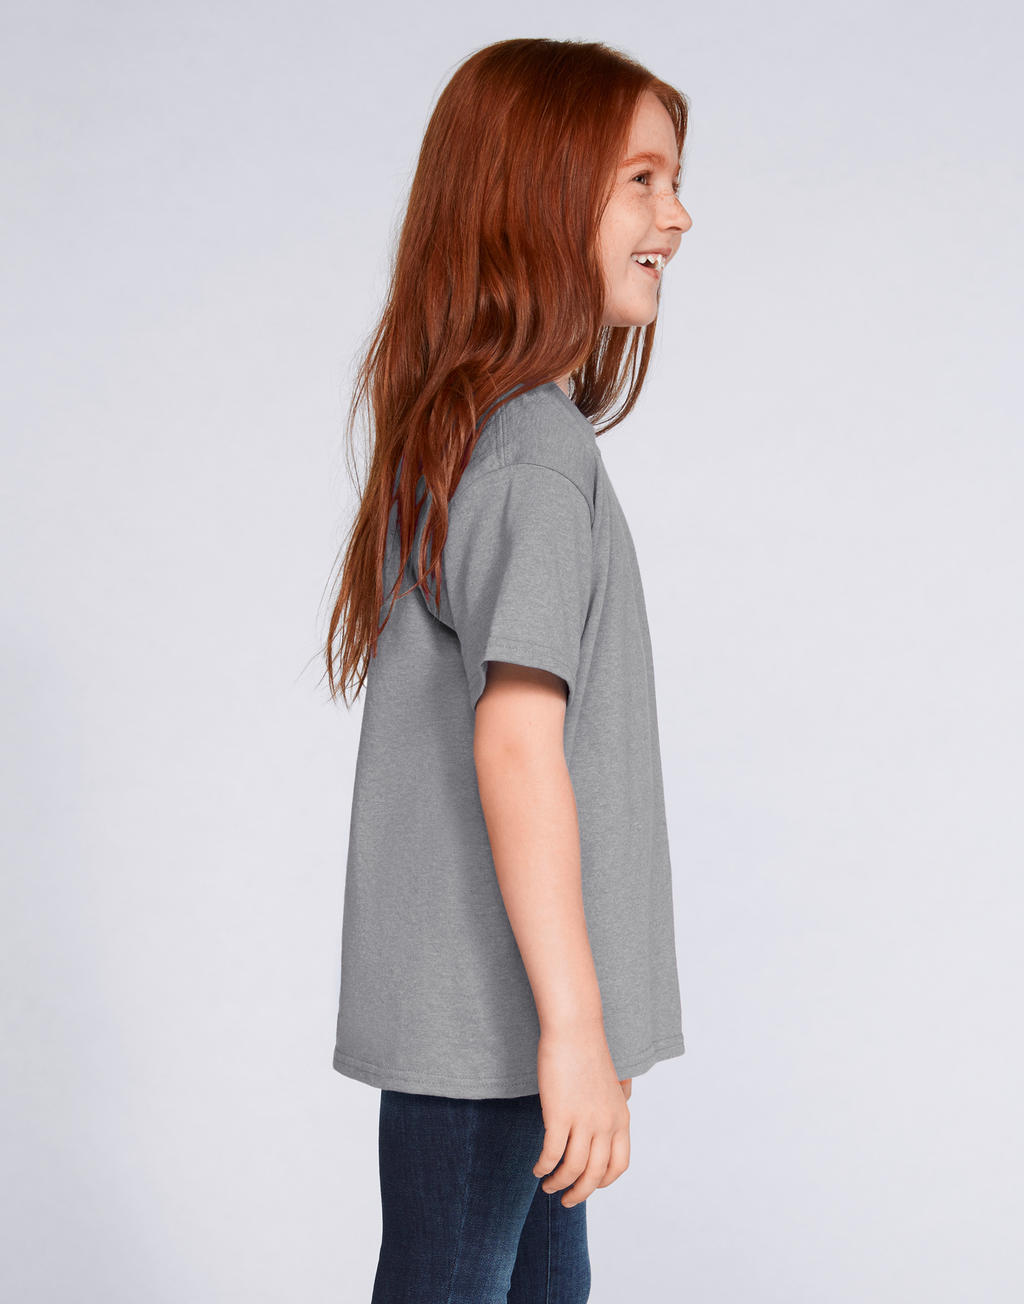  Heavy Cotton Youth T-Shirt in Farbe White